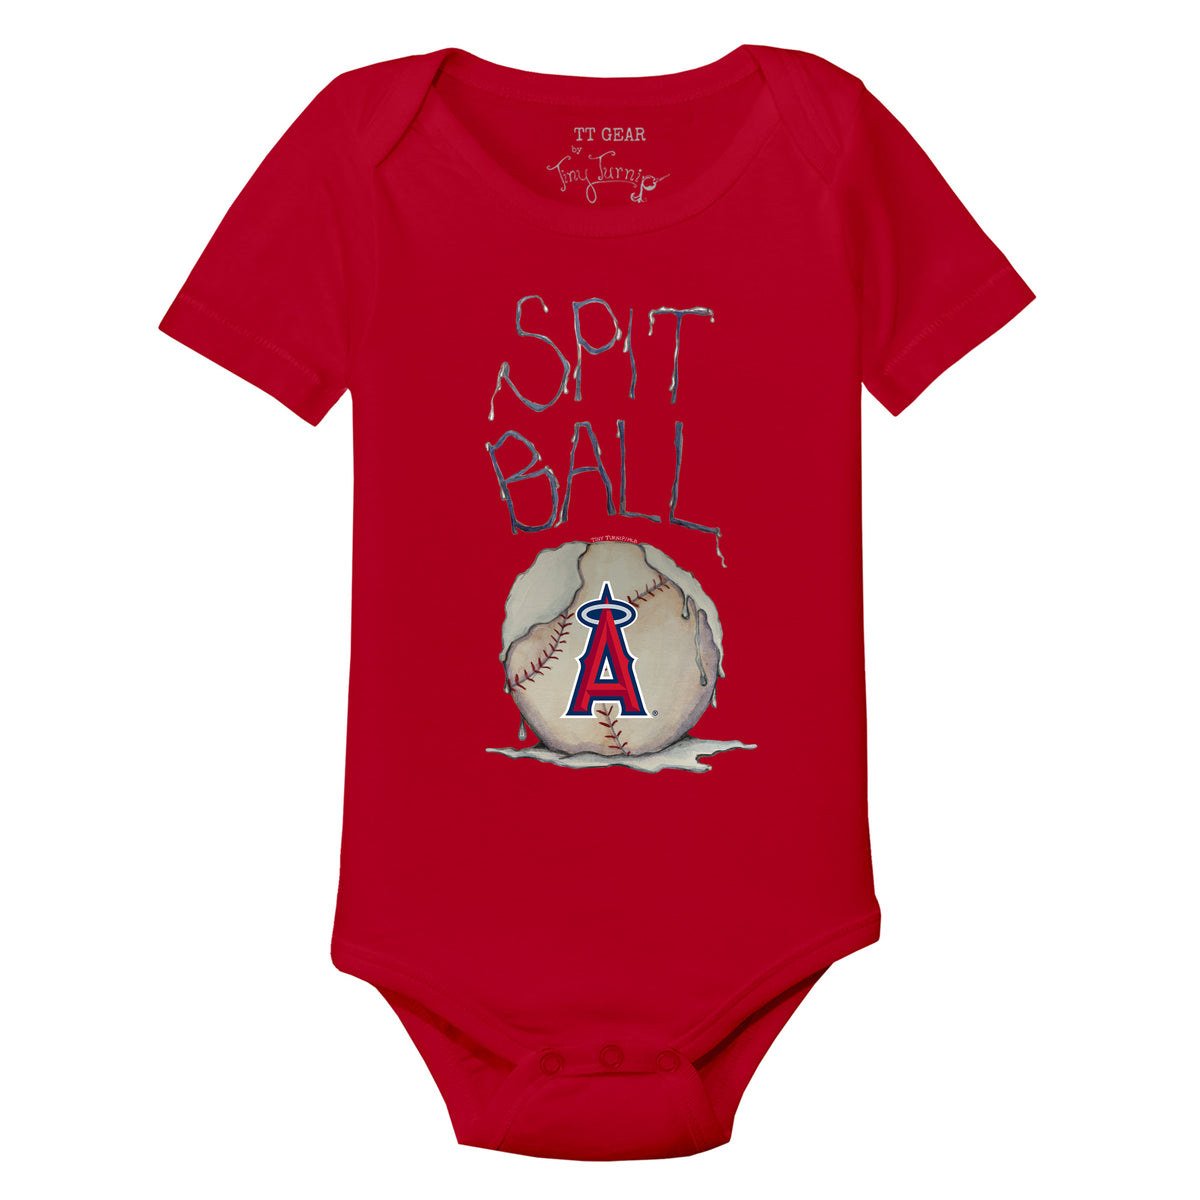 TinyTurnip Los Angeles Angels Shohei Ohtani Shotime Stacked Short Sleeve Jalynne Jersey Women's Small